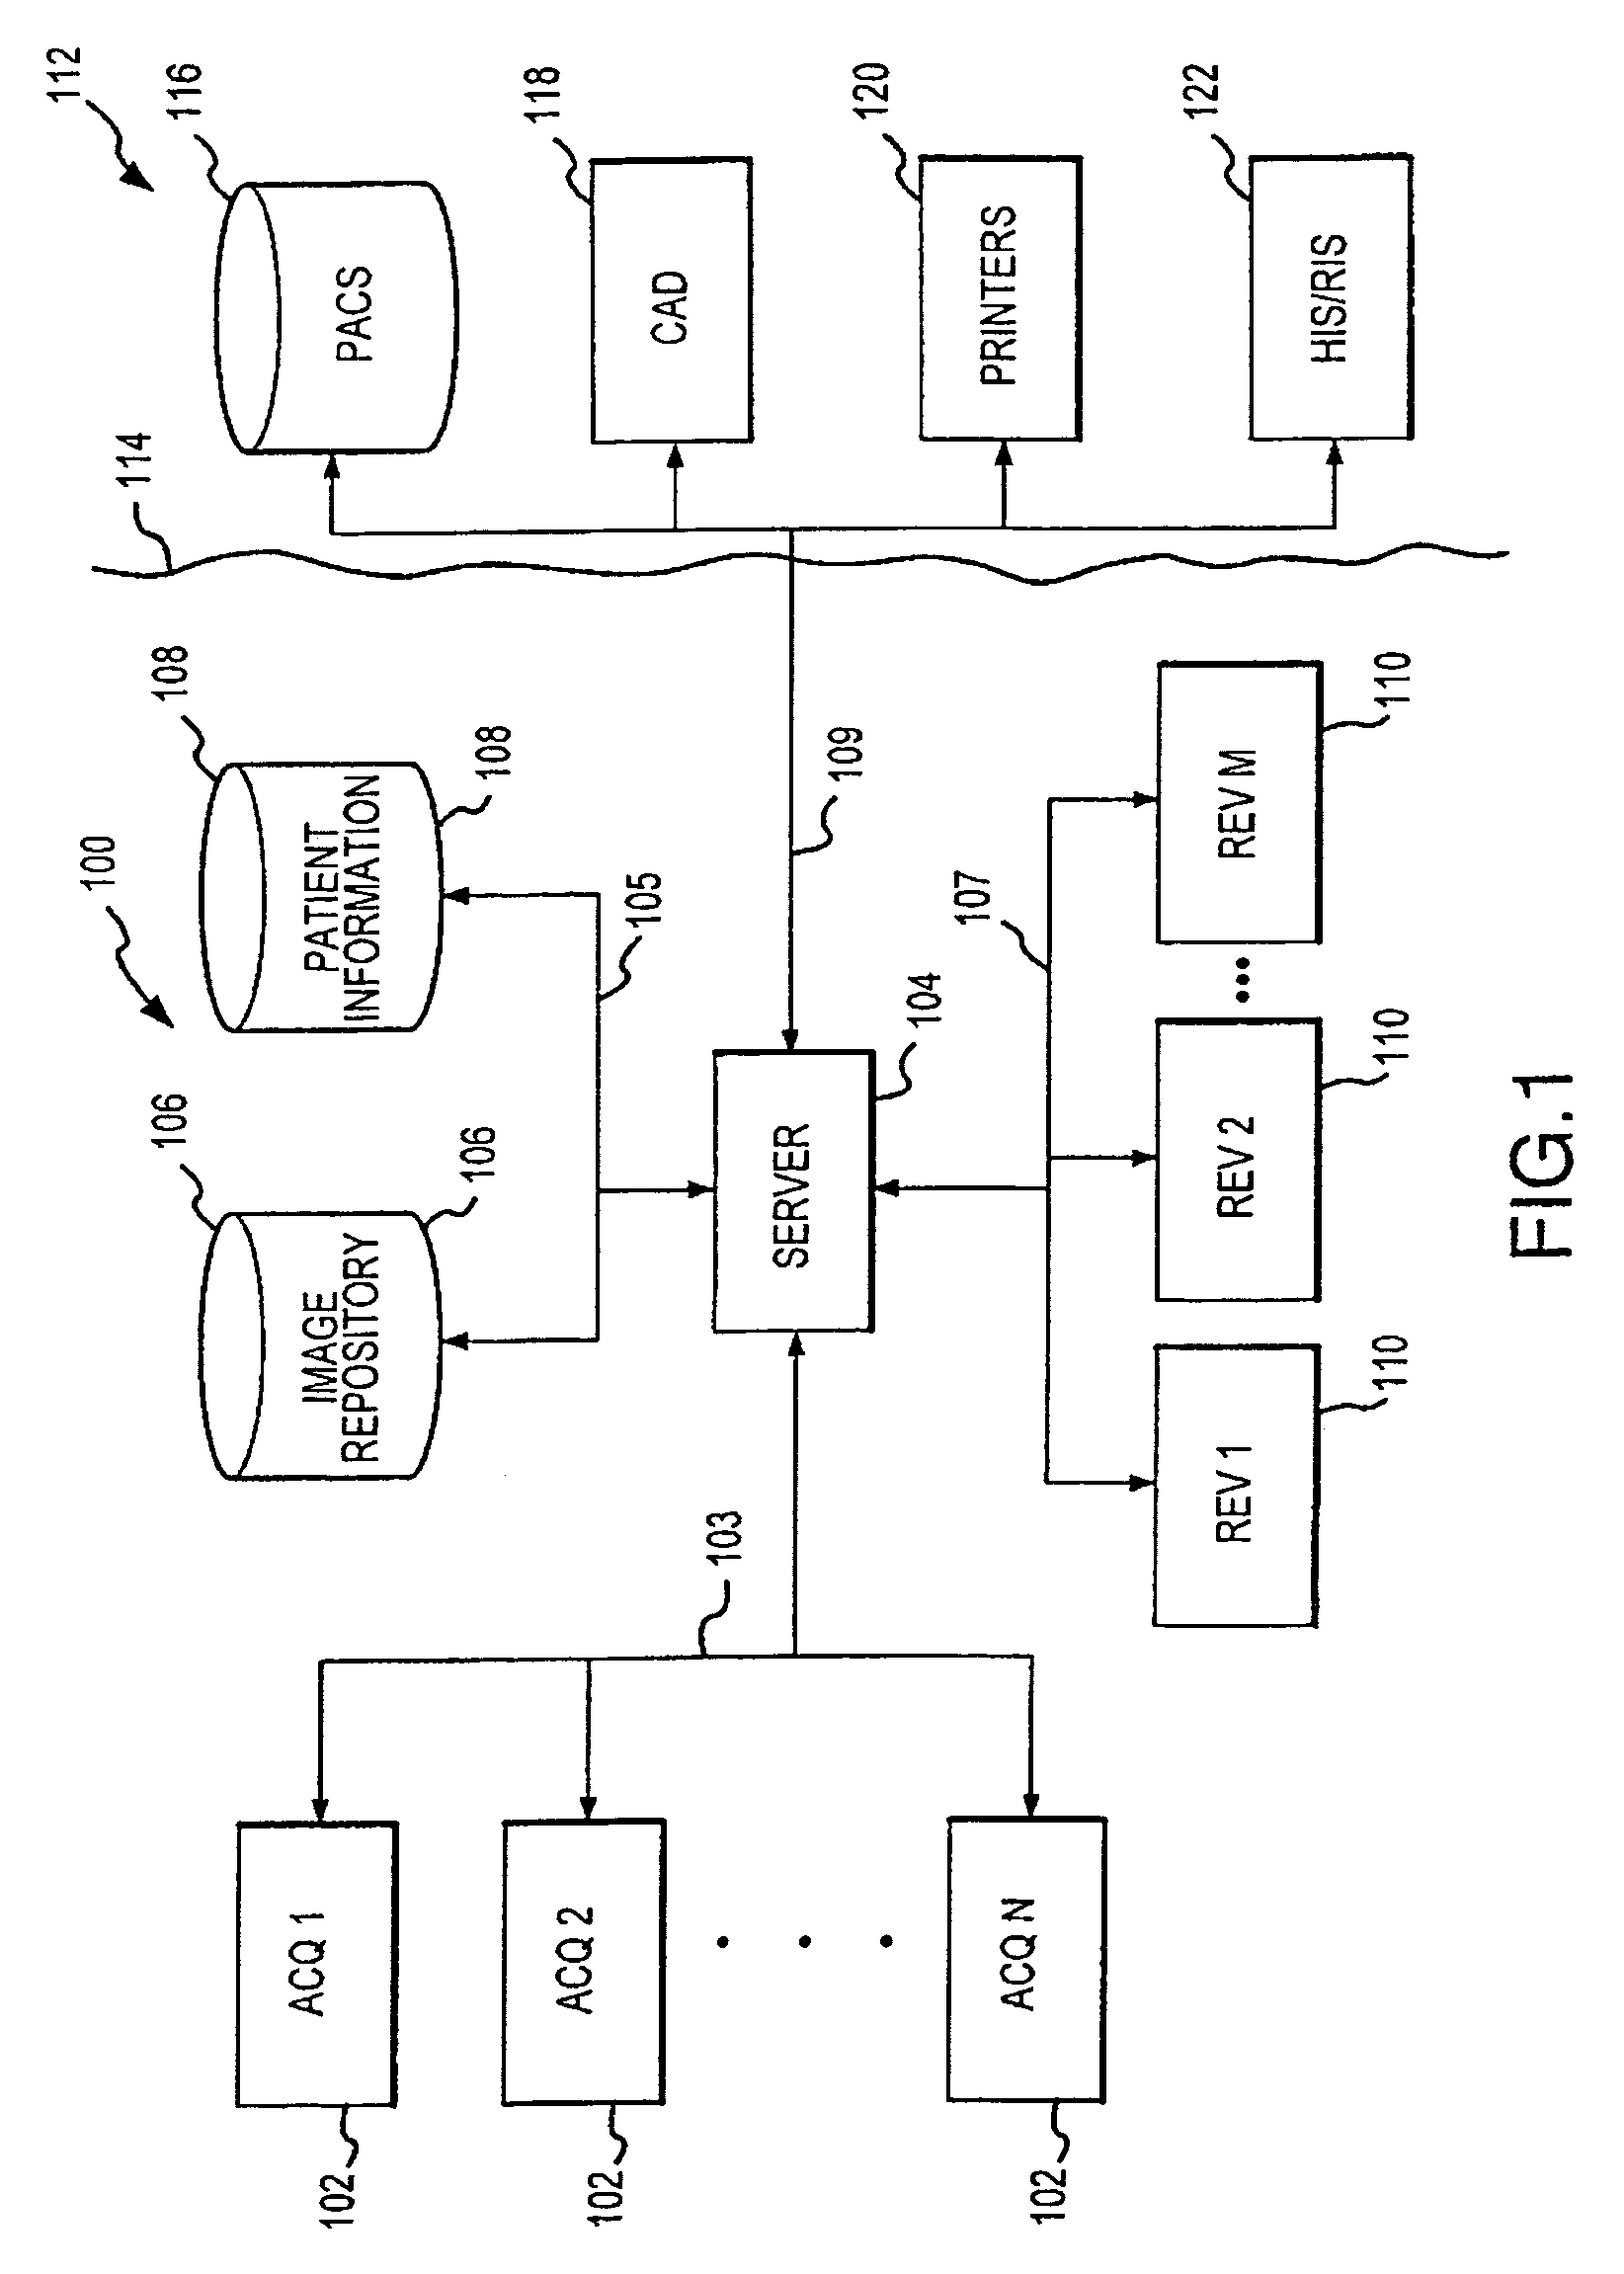 Distributed architecture for mammographic image acquisition and processing